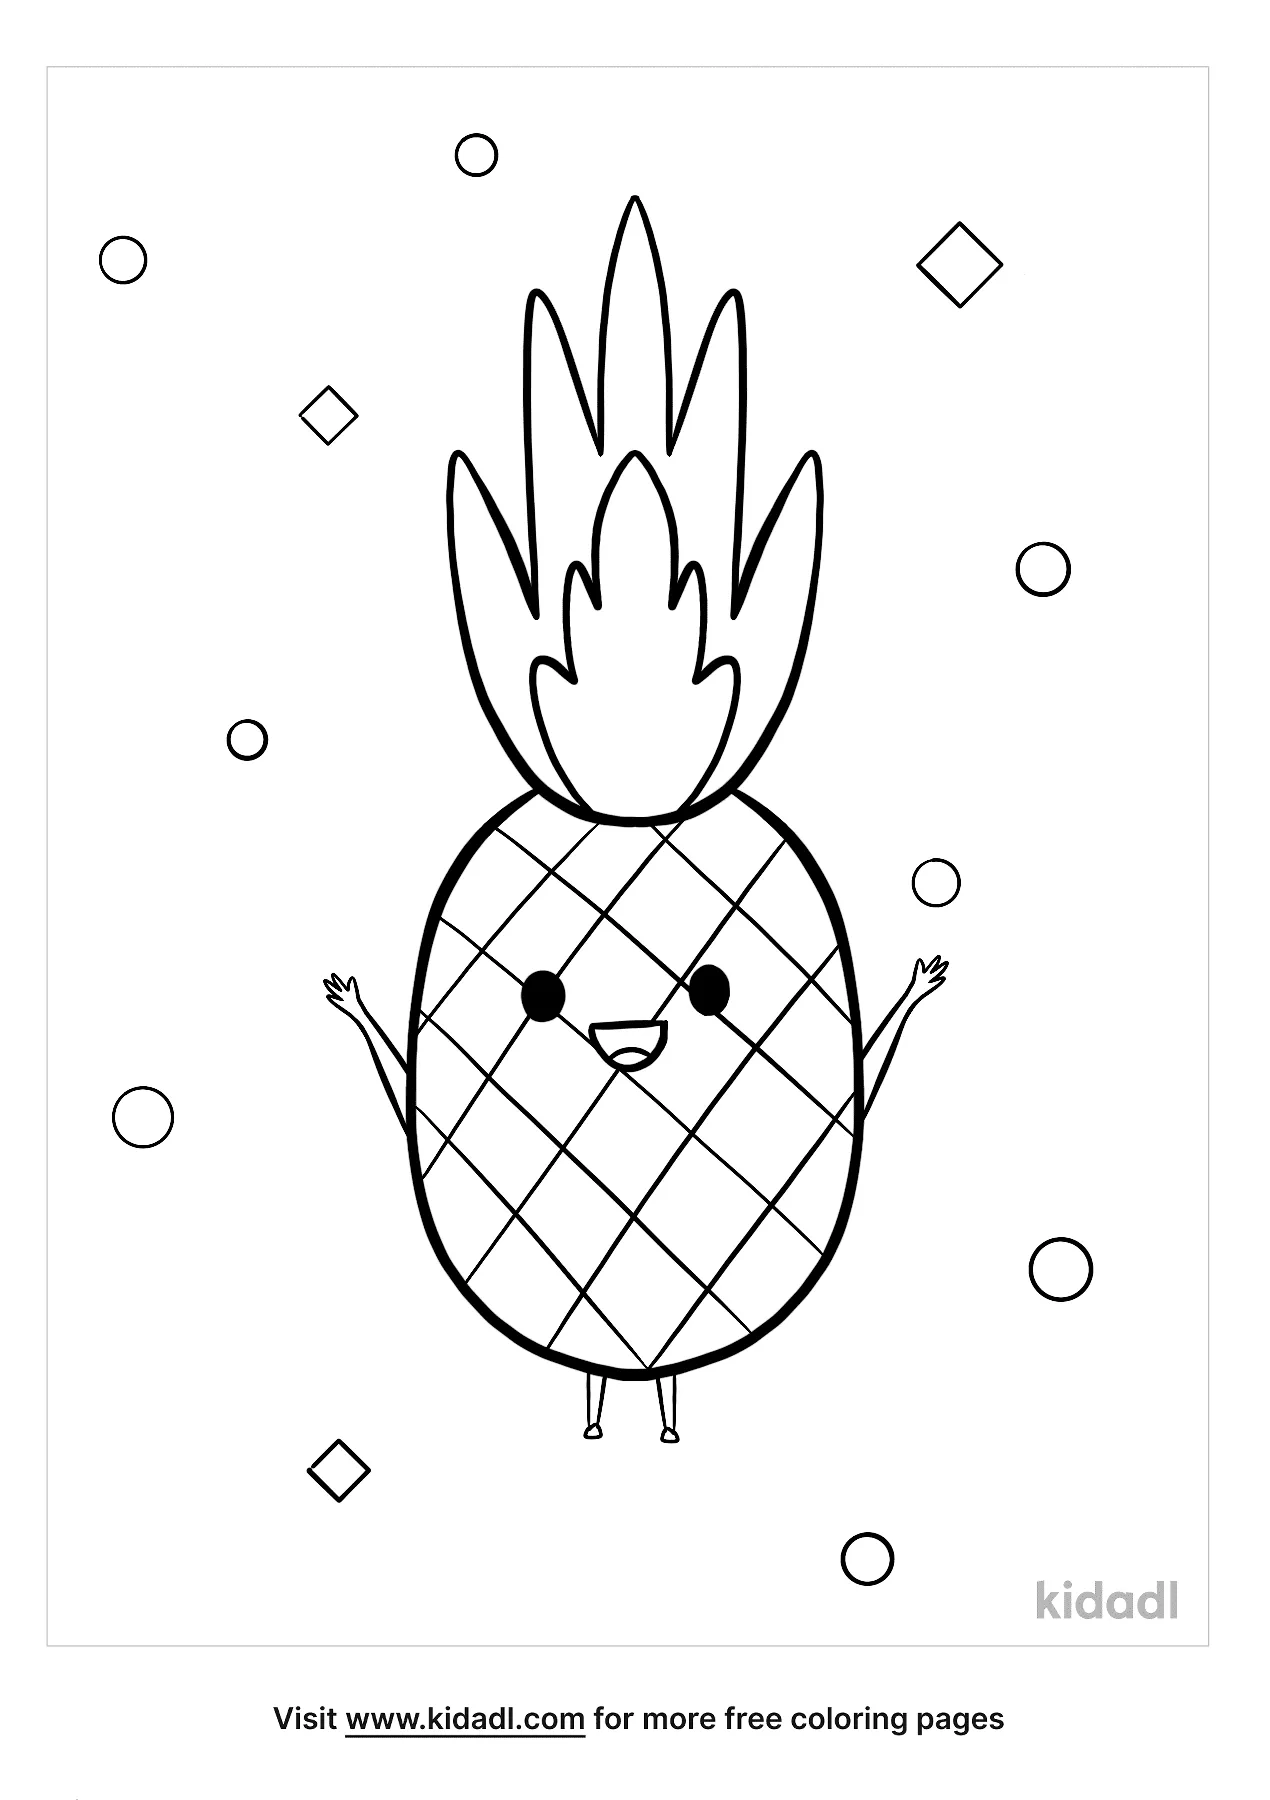 Cute Pineapple Coloring Pages Free Food Coloring Pages Kidadl